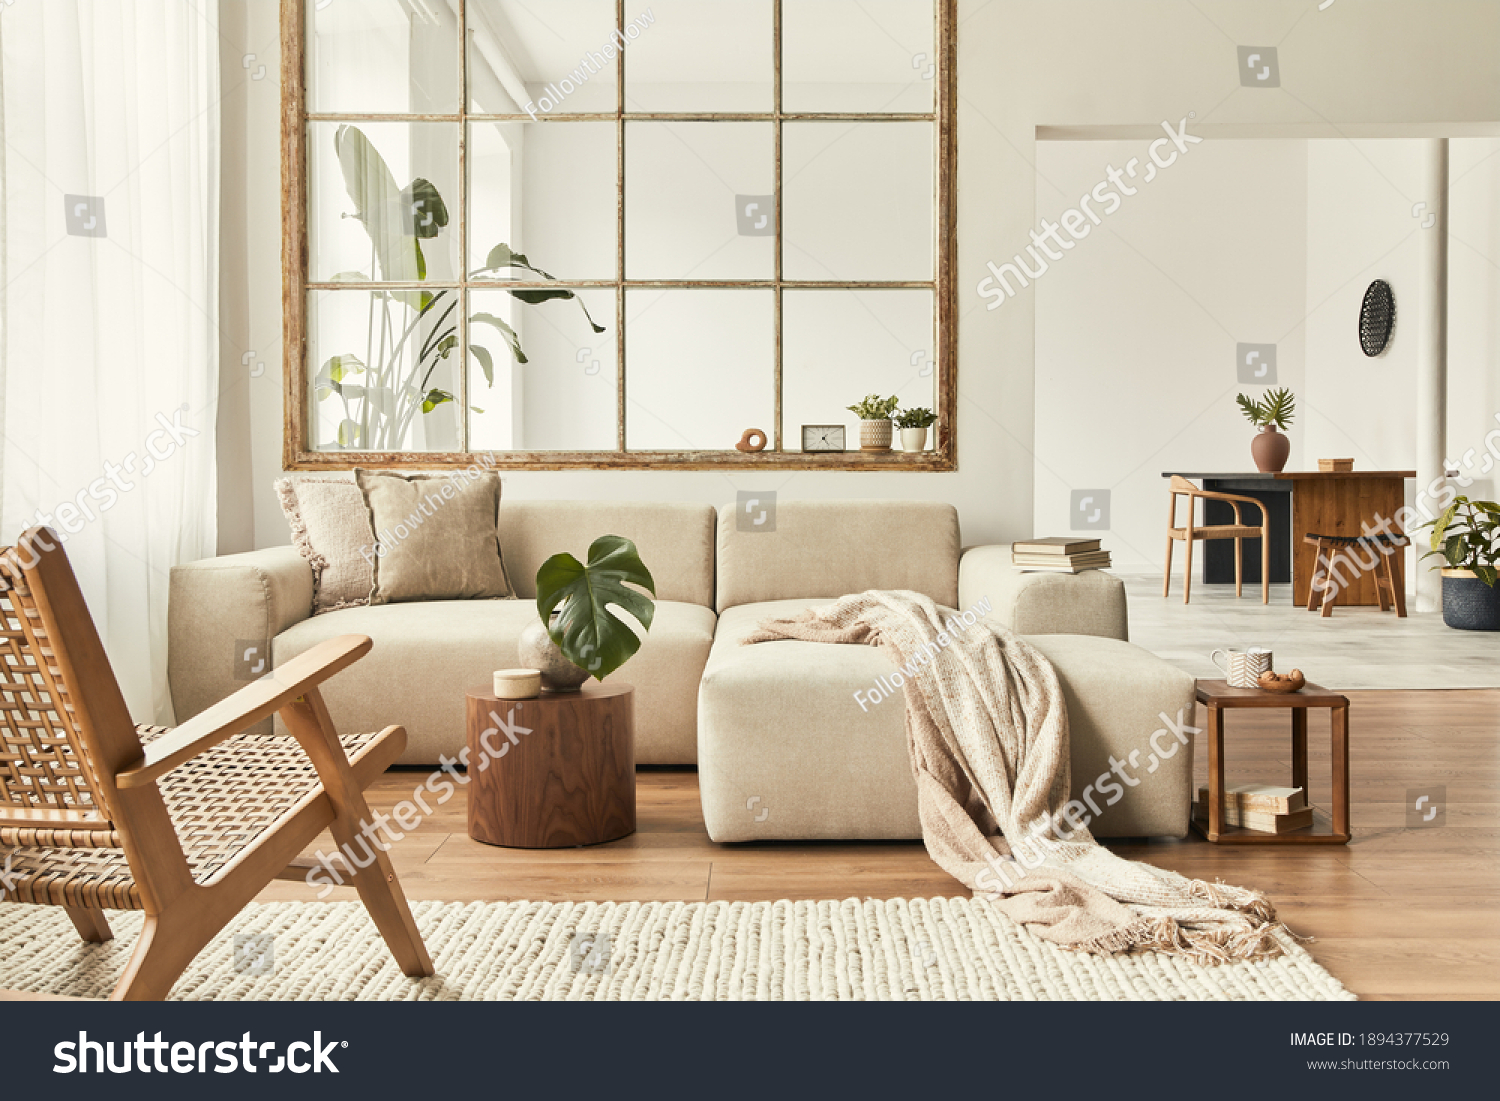 Modern interior of open space with design modular sofa, furniture, wooden coffee tables, plaid, pillows, tropical plants and elegant personal accessories in stylish home decor. Neutral living room. #1894377529